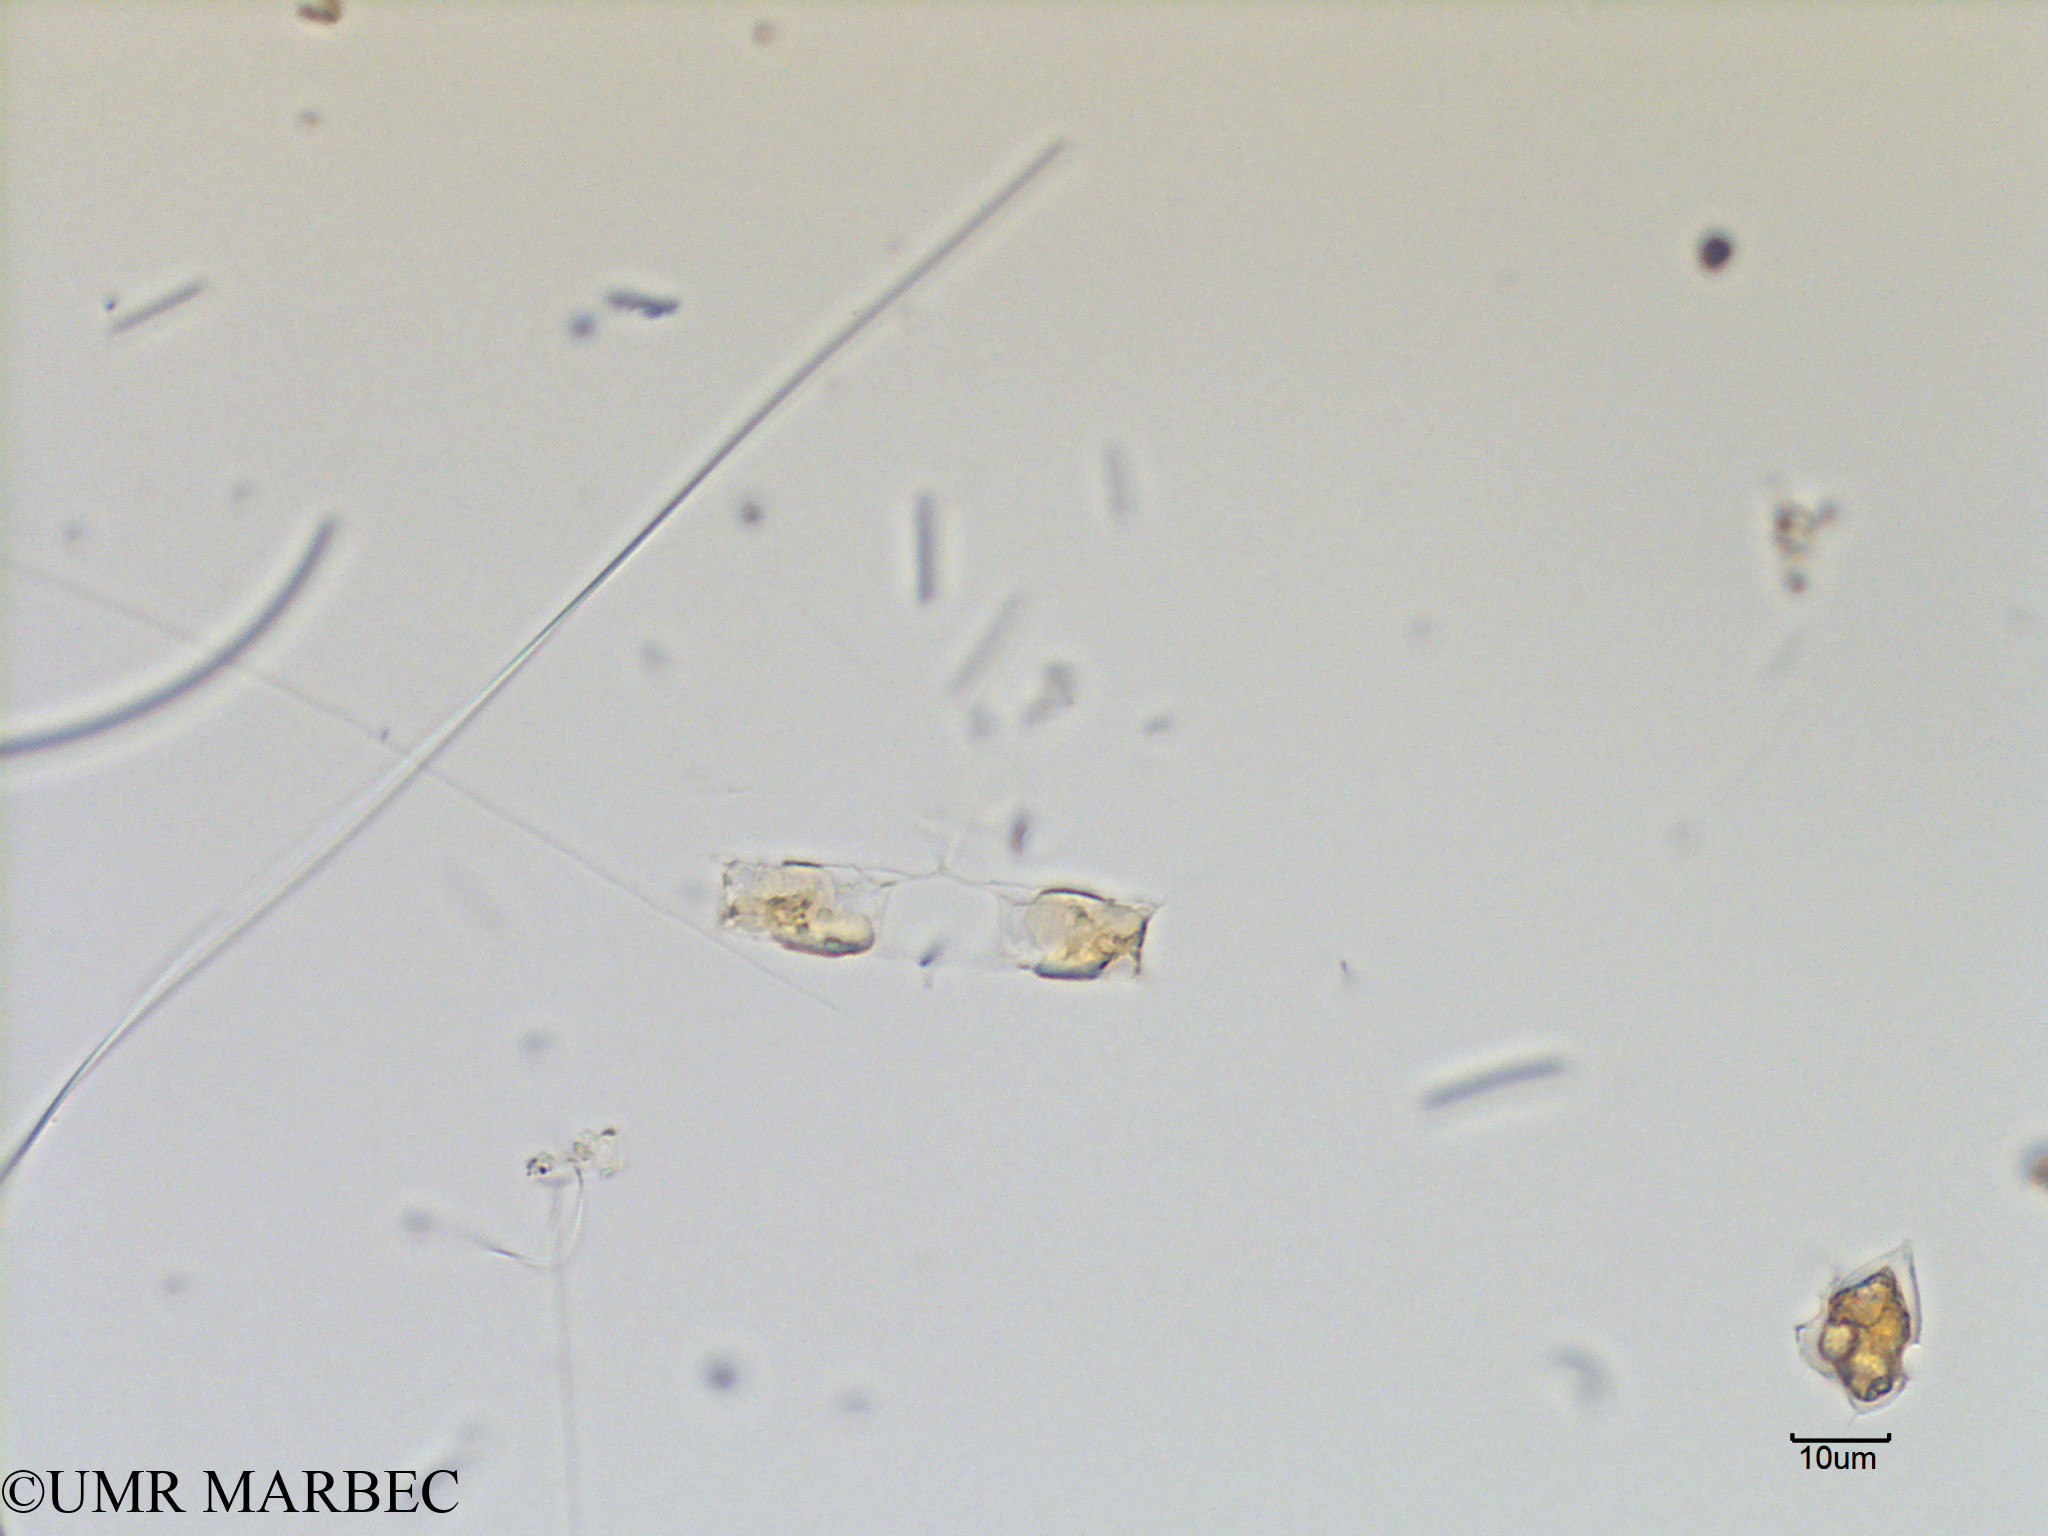 phyto/Scattered_Islands/mayotte_lagoon/SIREME May 2016/Chaetoceros distans (MAY5_chaetoceros b-7).tif(copy).jpg